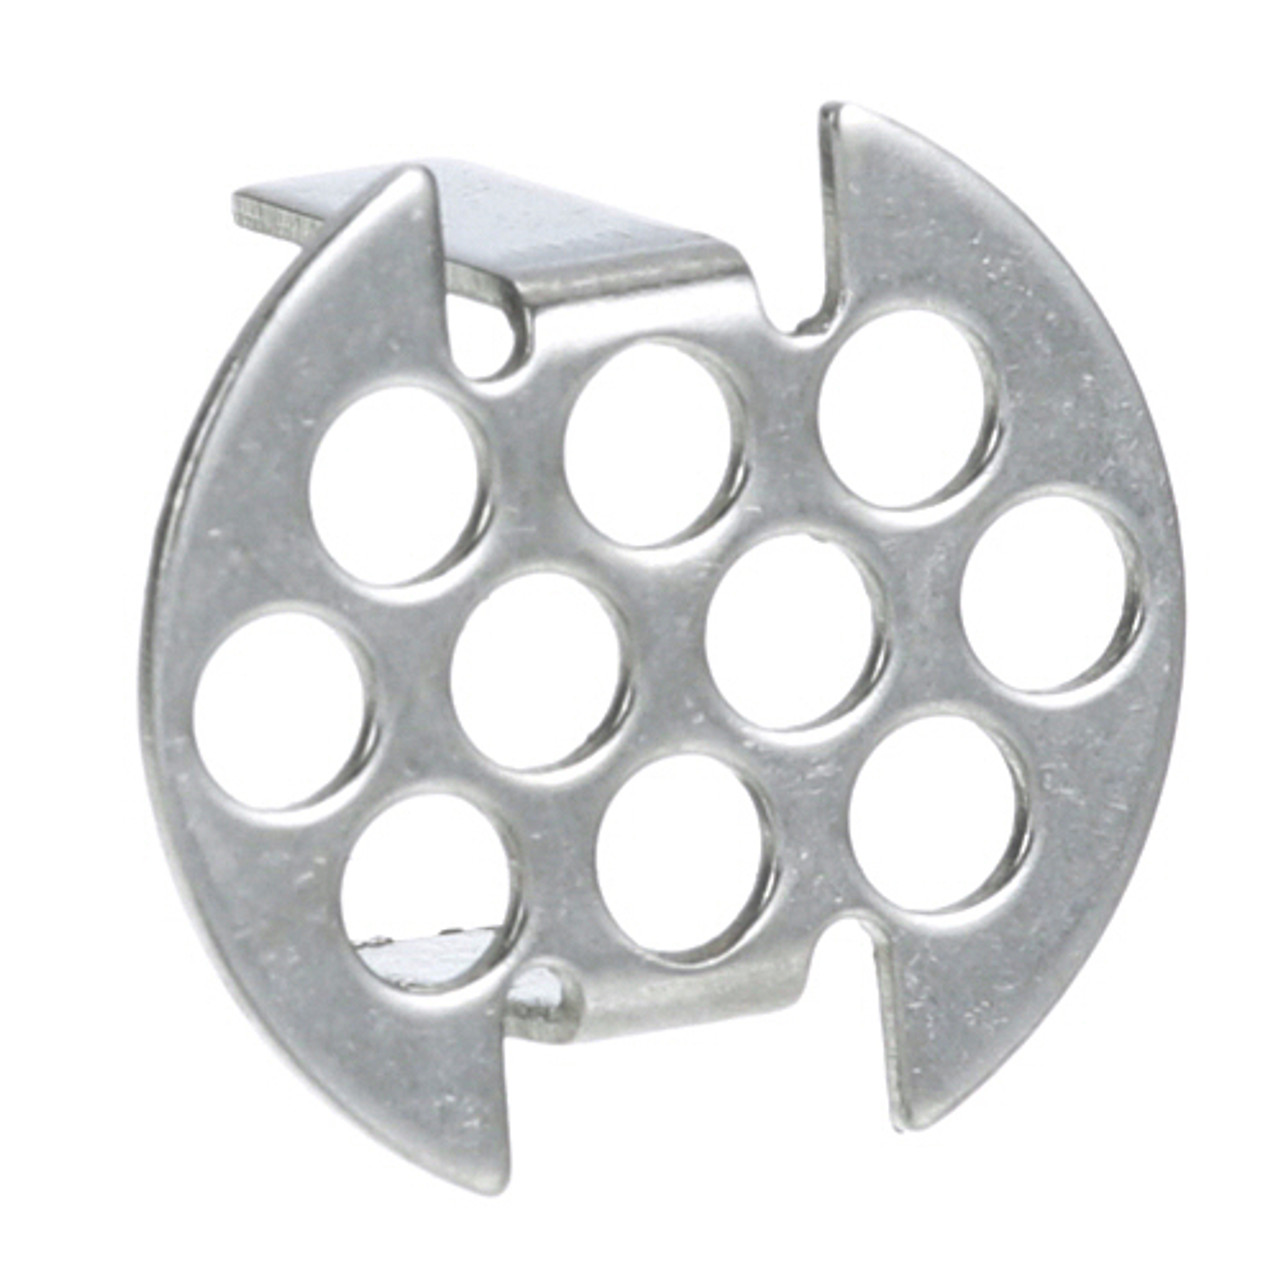 Drain Screen - Replacement Part For Star Mfg 21709